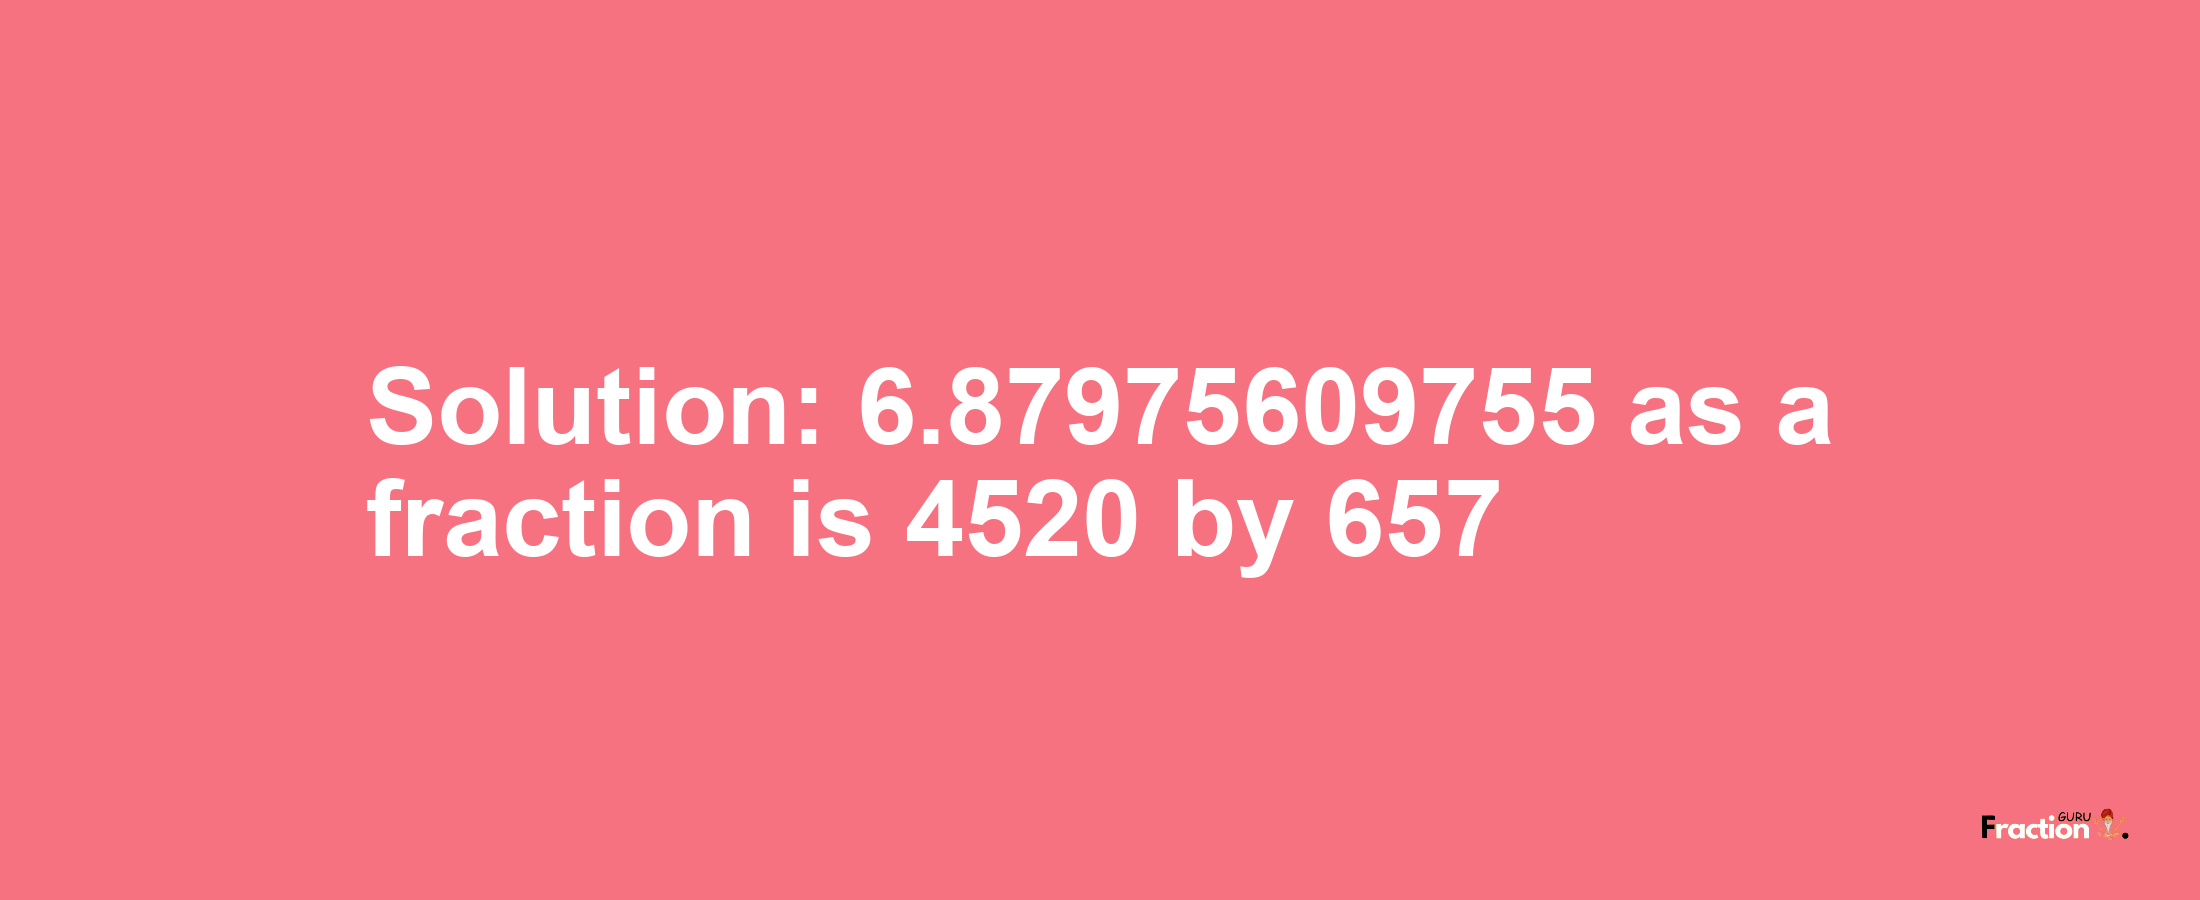 Solution:6.87975609755 as a fraction is 4520/657